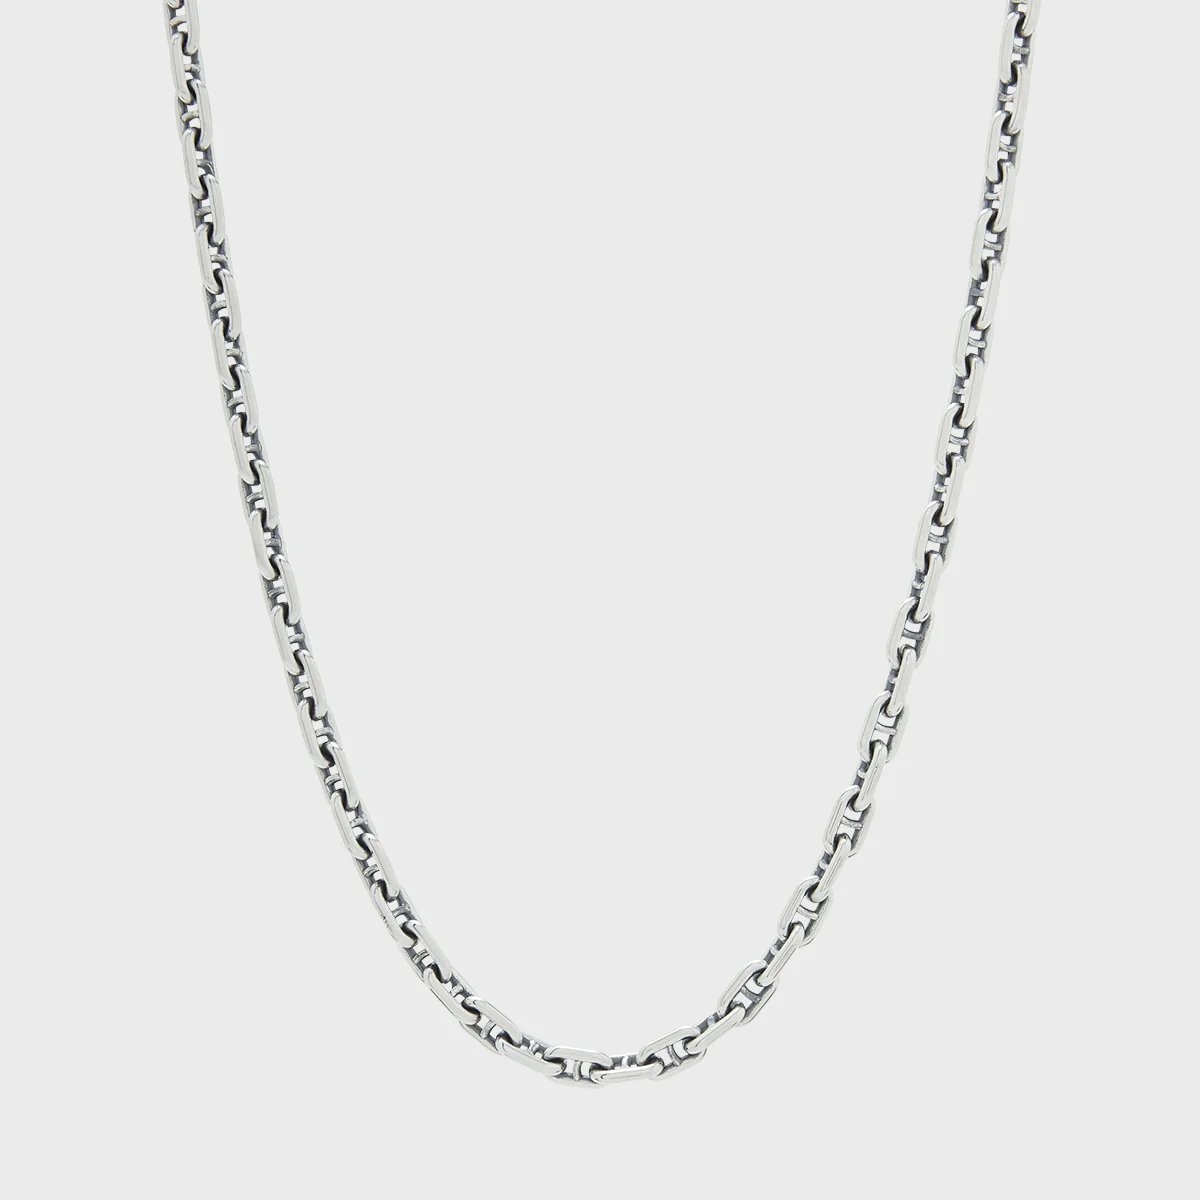 CS-M22-3A24 GOOD ART HLYWD Model 22 Necklace Link Size 3A At 24'' - Sterling Silver - 1